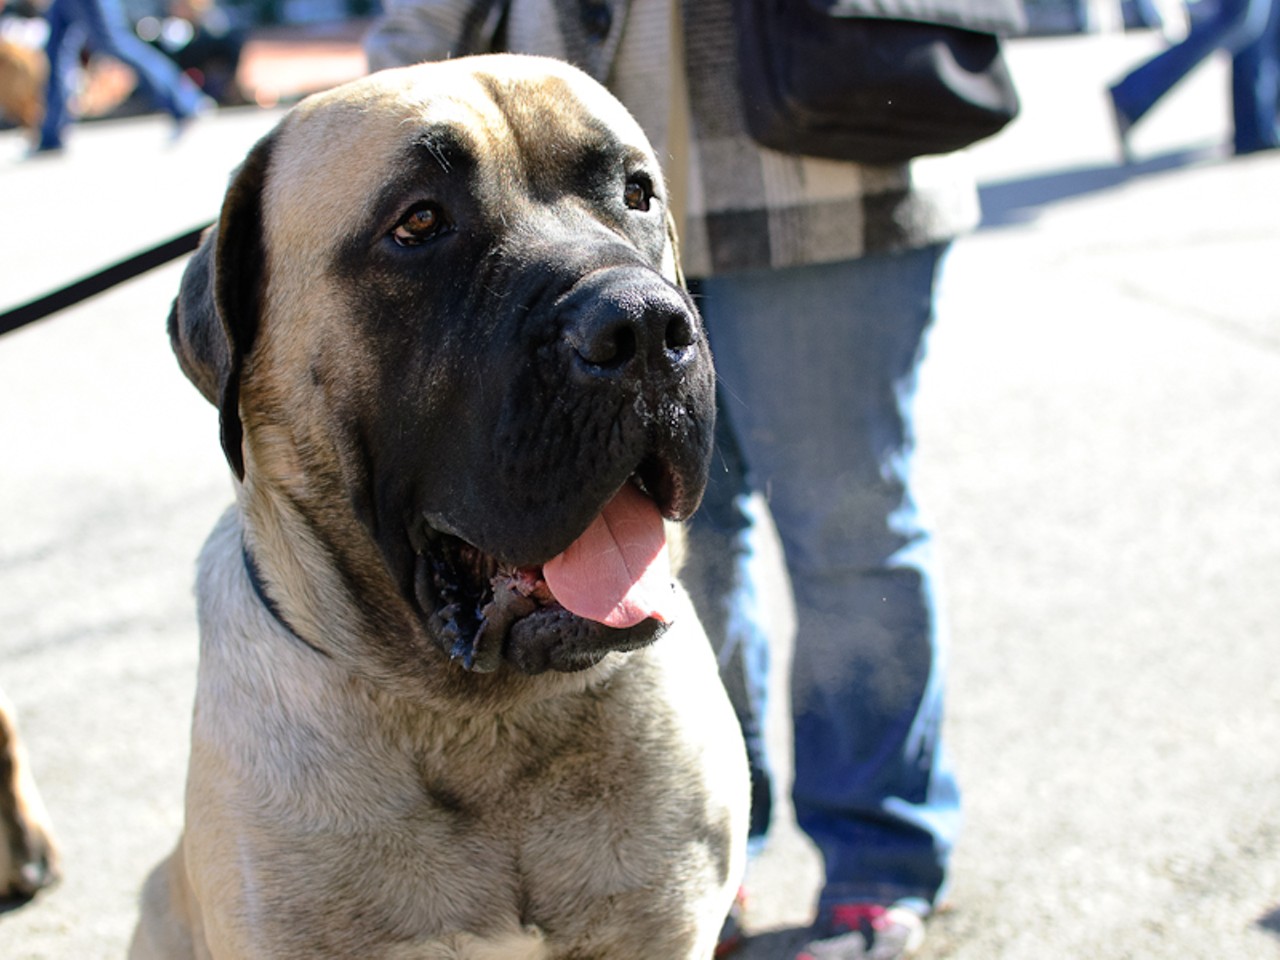 Soulard was also host to the annual Beggin' Pet Parade this Sunday -- and many pooches were out, strutting their stuff.